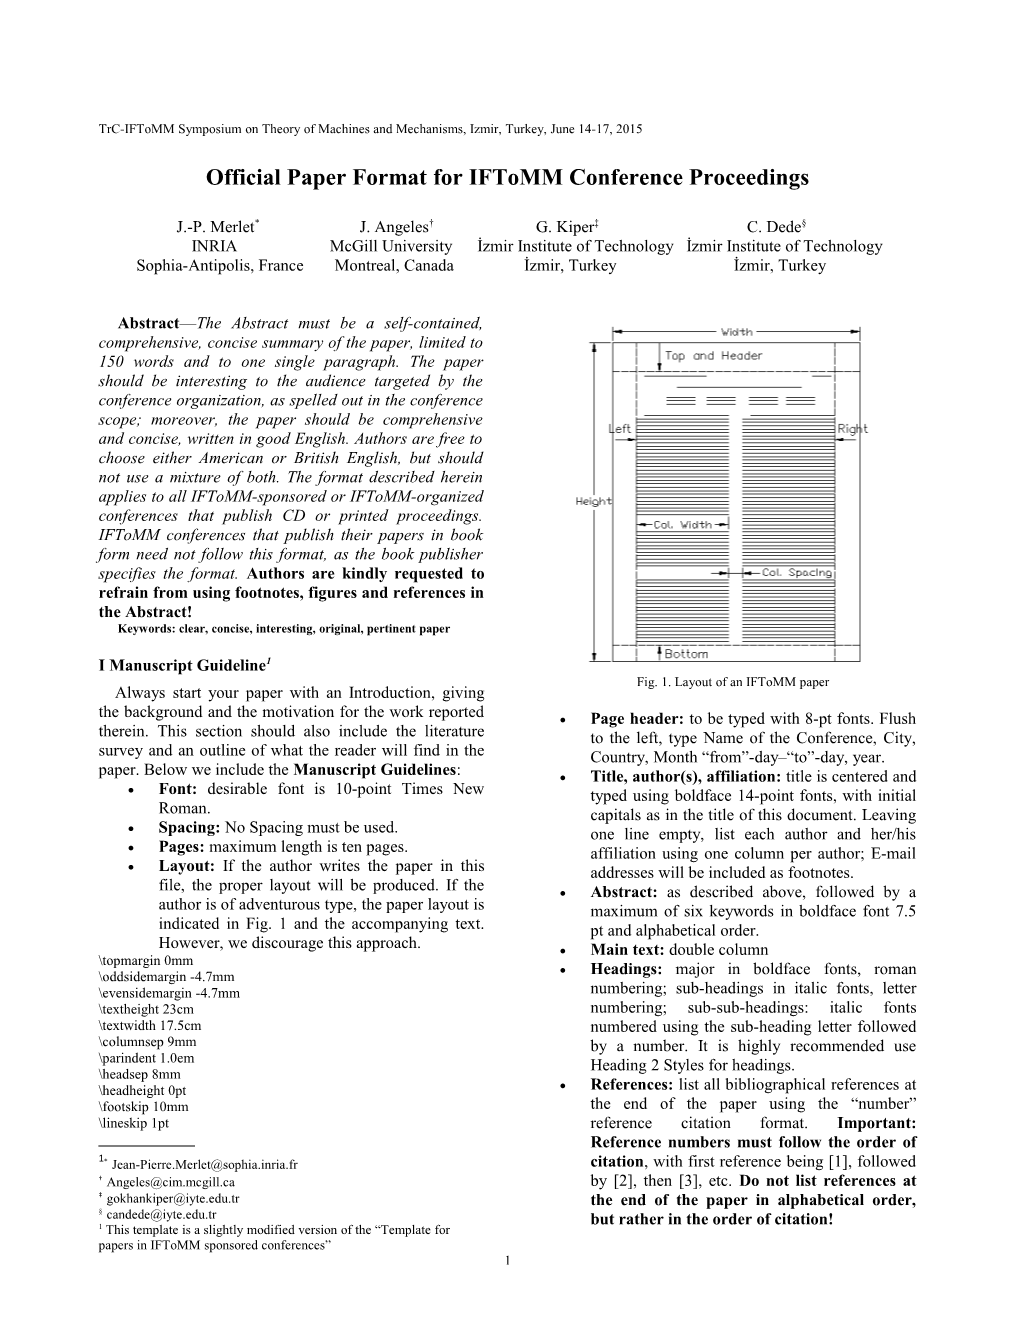 Official Paper Format for Iftomm Conference Proceedings